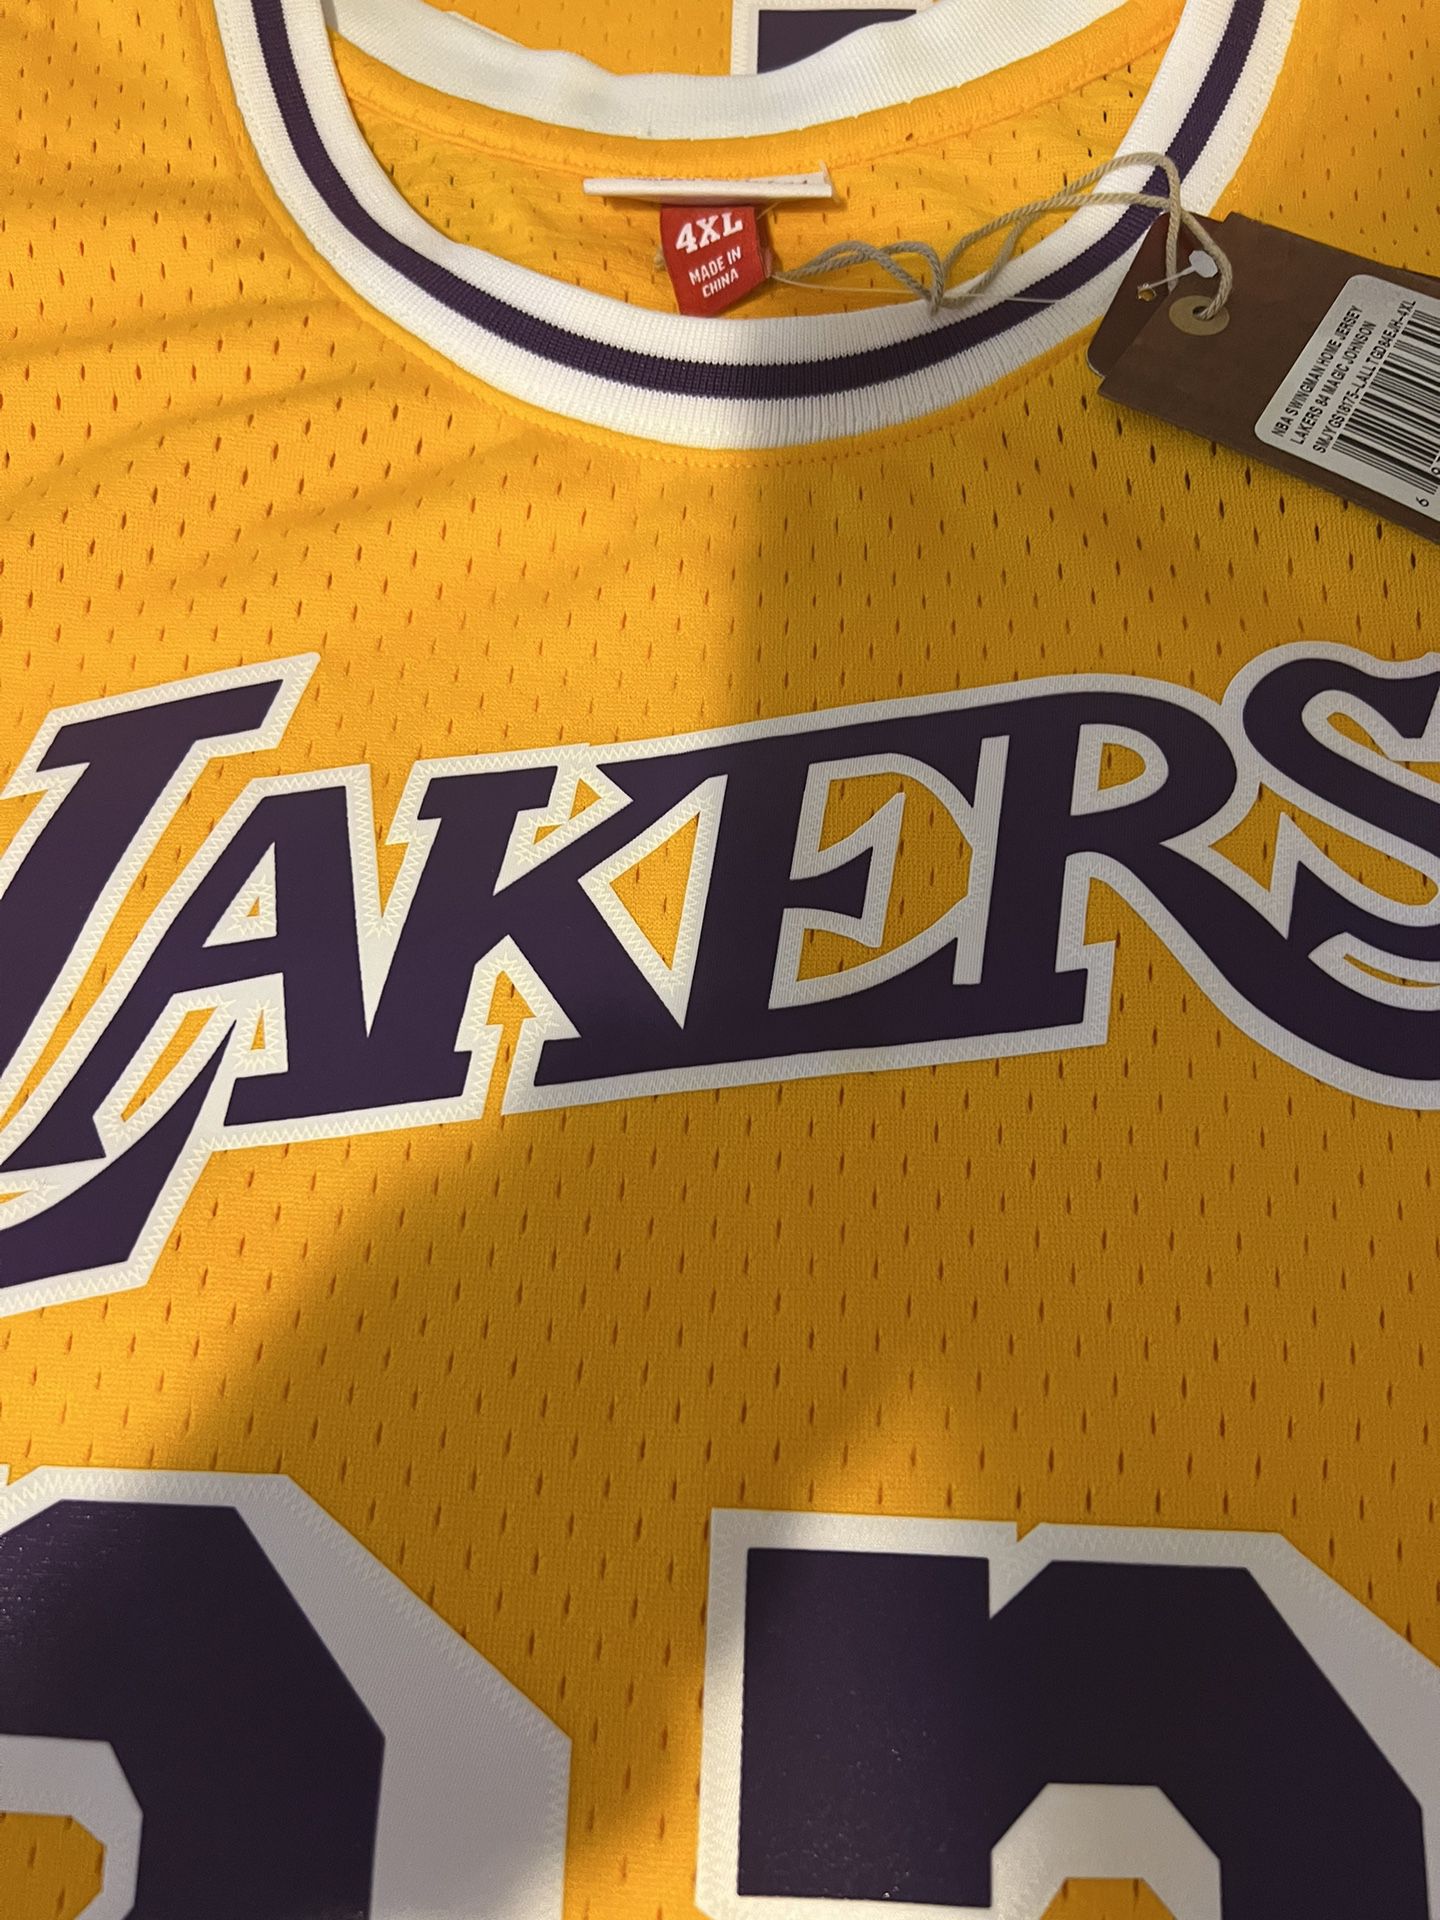 Nba Mitchell And Ness Swingman Jersey Los Angeles Lakers Home 1984-85 Magic  Johnson Mens Large , XL And XXL for Sale in City Of Industry, CA - OfferUp